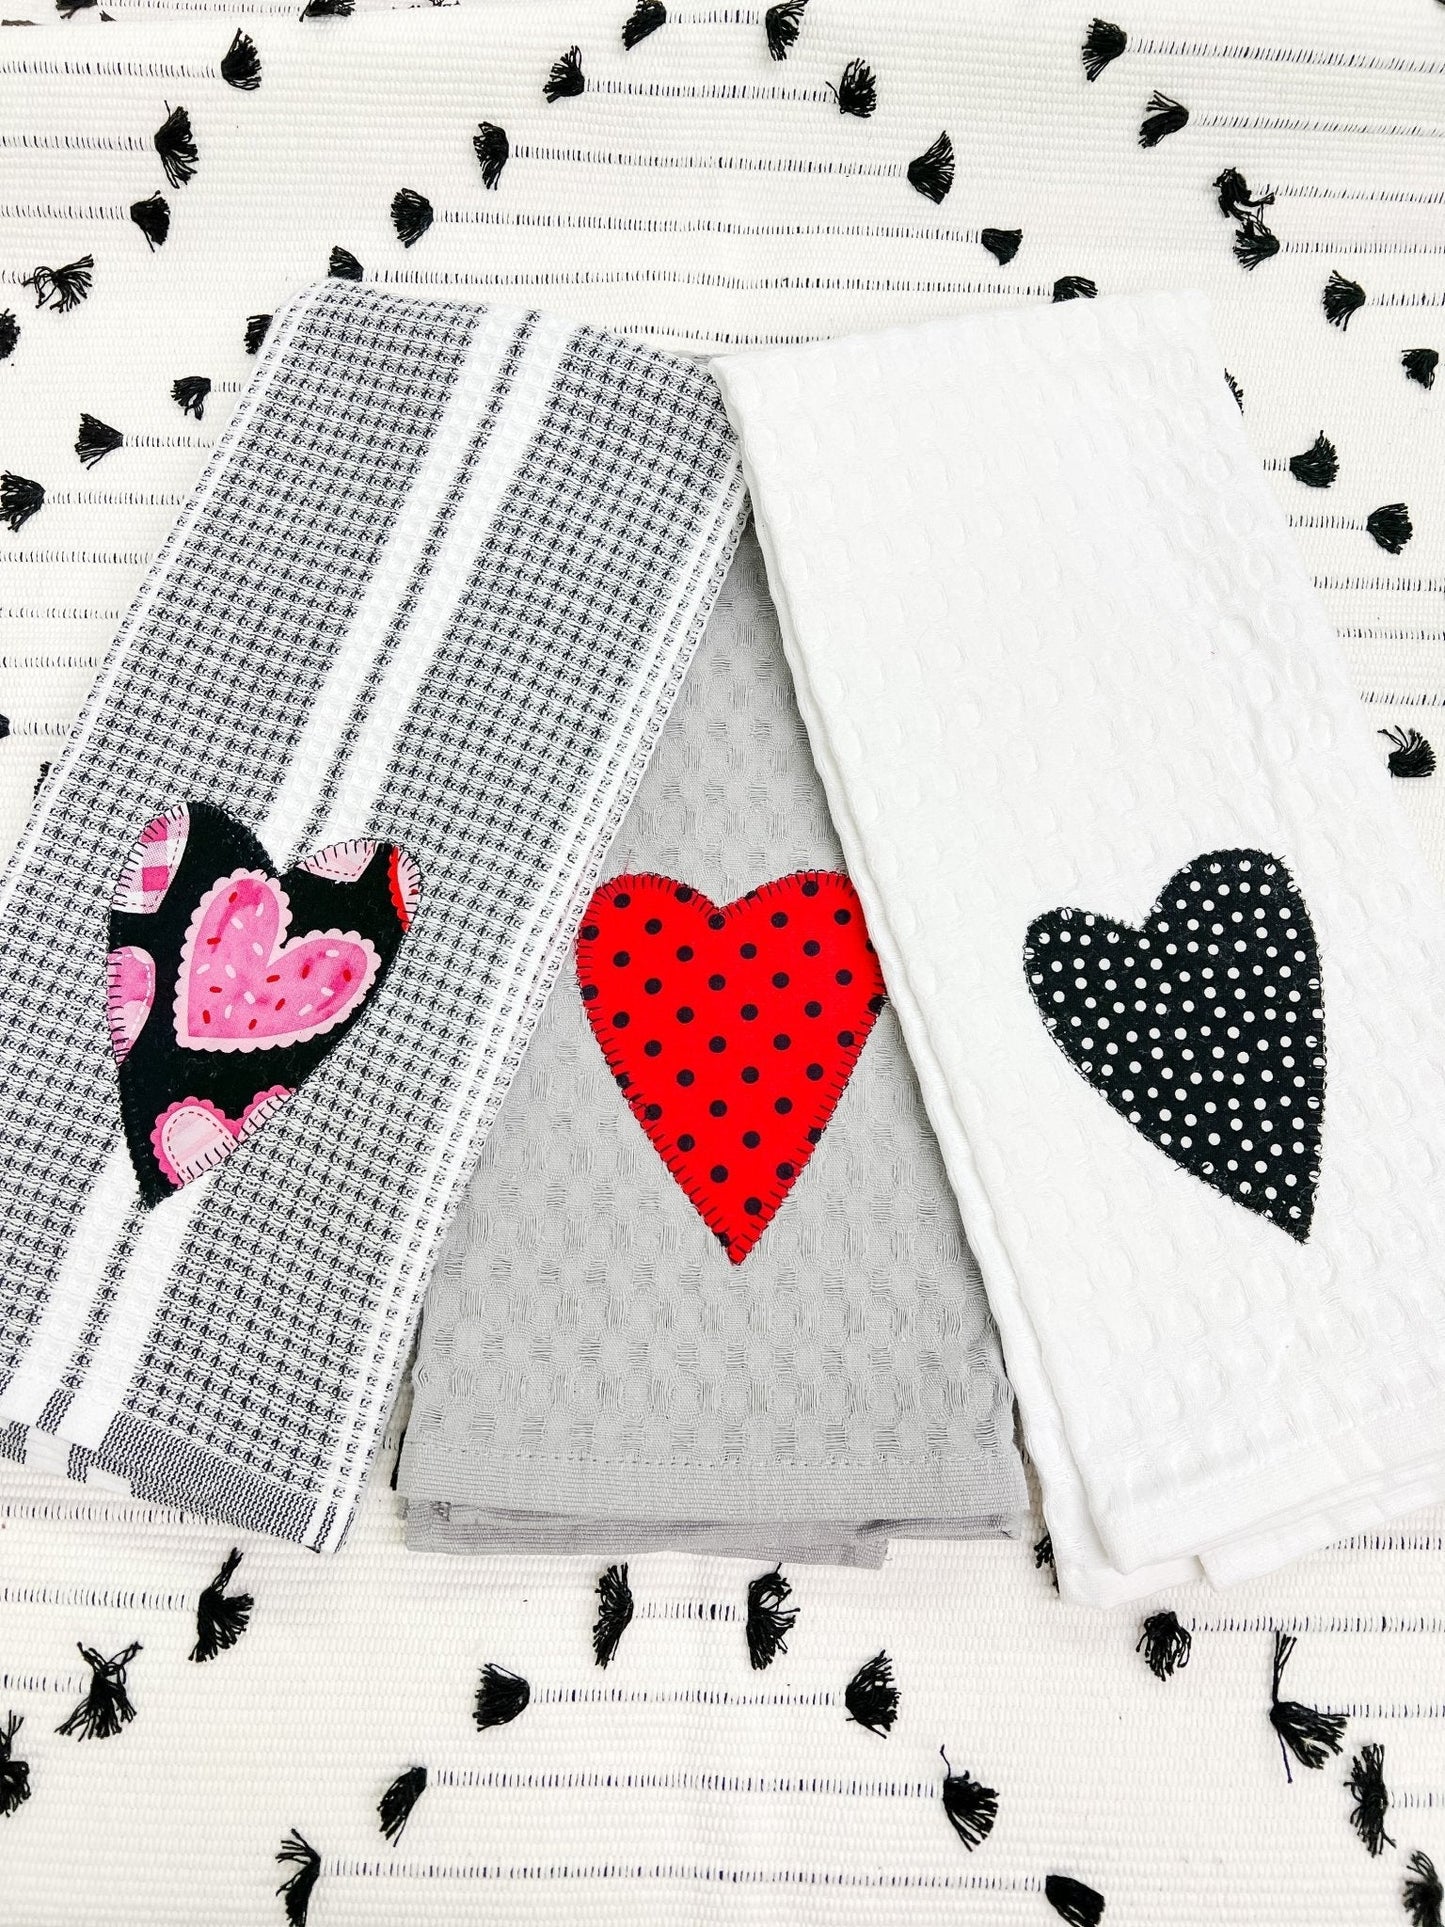 Grey/White/Black Heart Towel - Self Checkout at Creative Collab Collection - Miss Molly Designs, LLC